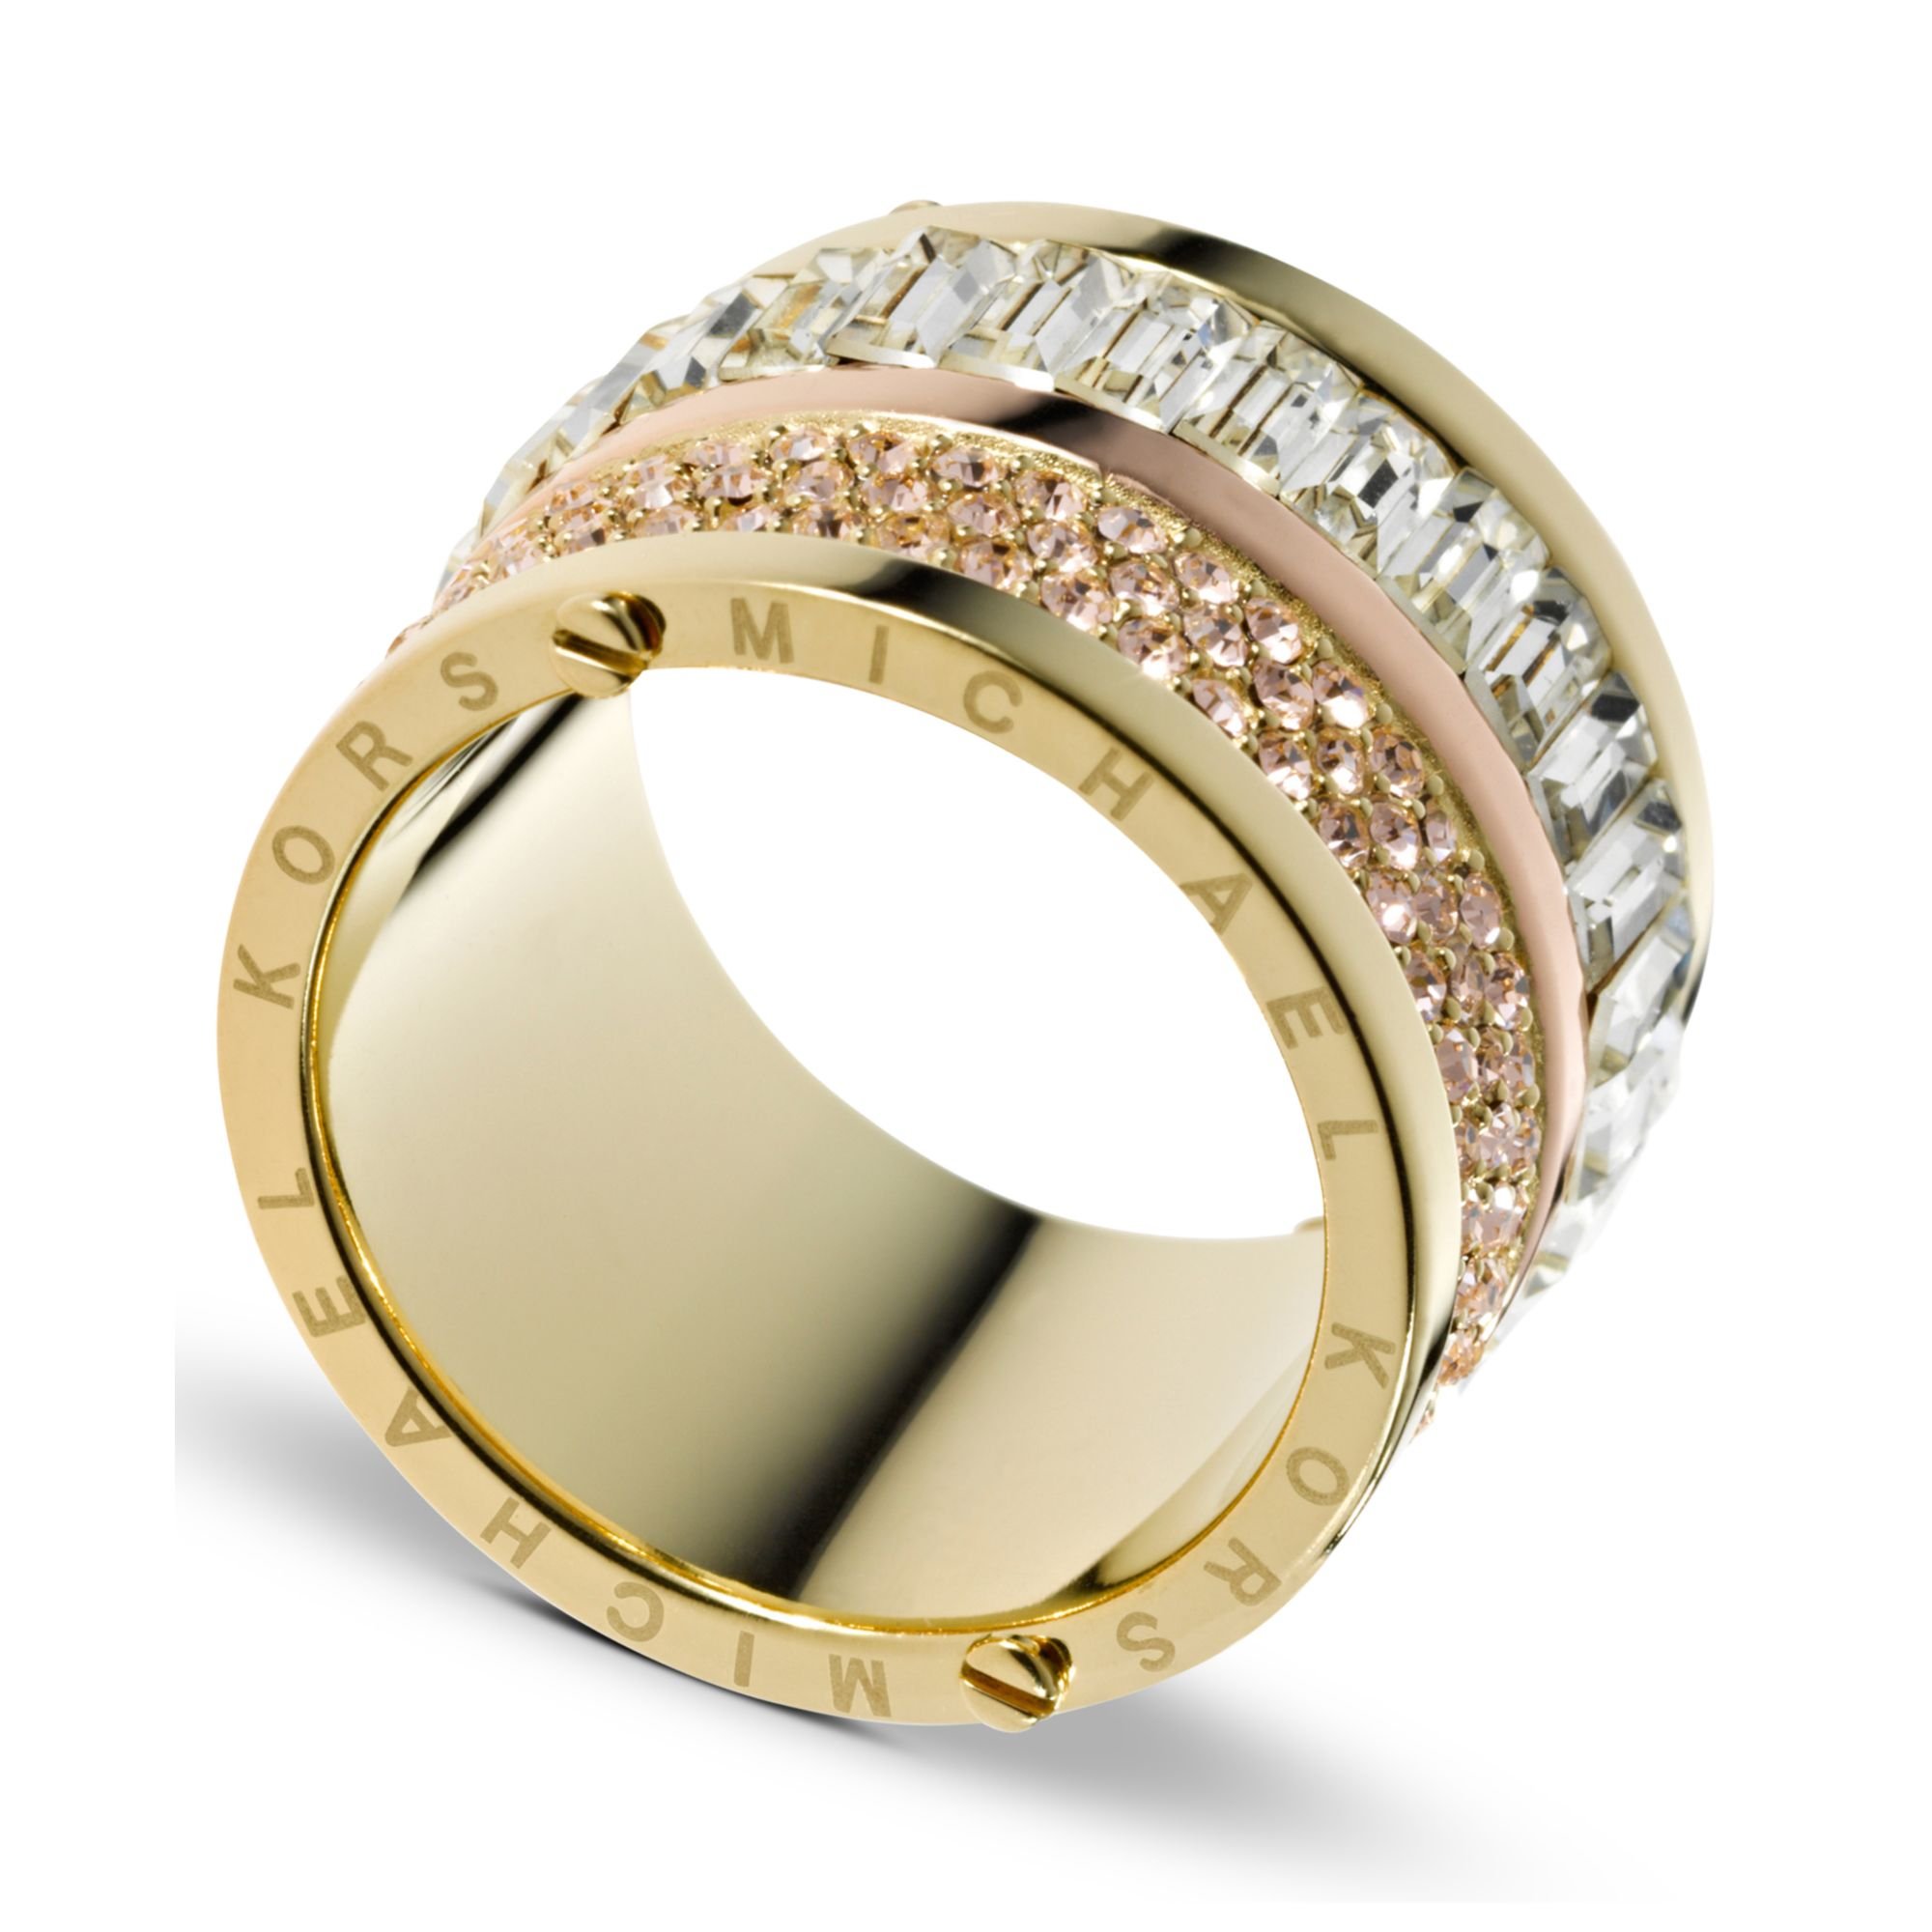 and baguette-cut stone accents, this barrel-shaped michael kors ring ...